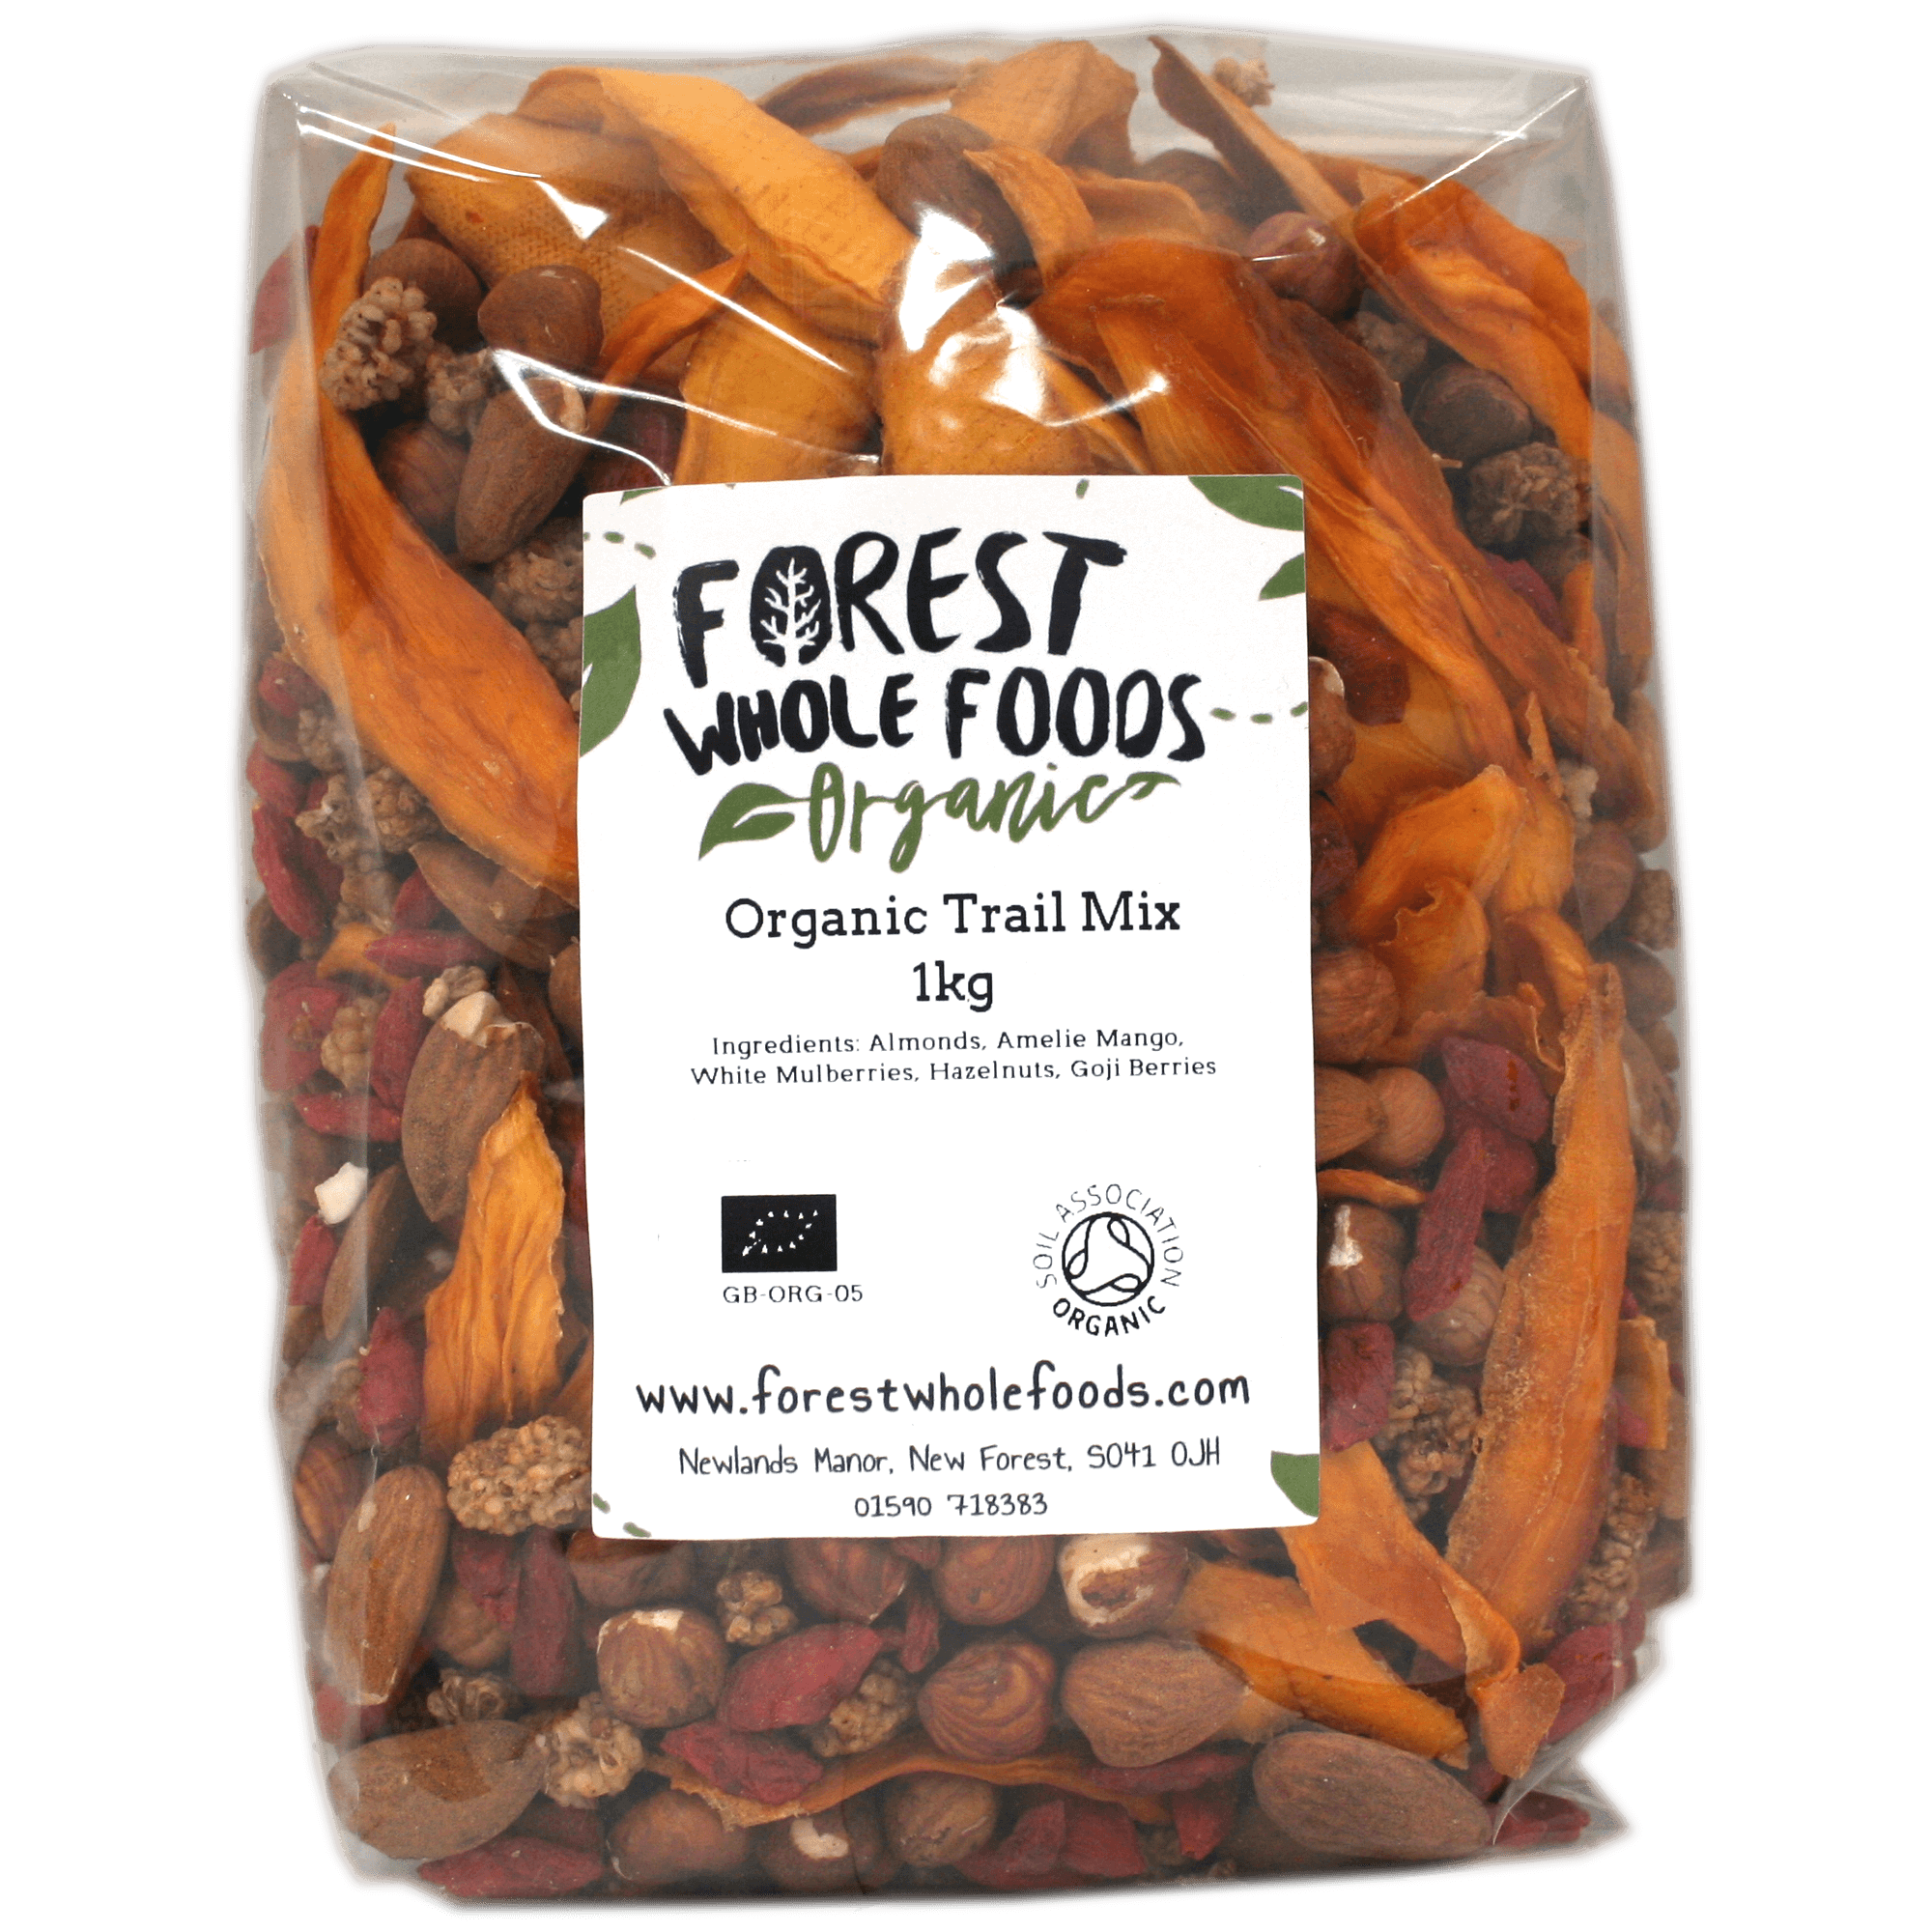 Organic Trail Mix - Forest Whole Foods